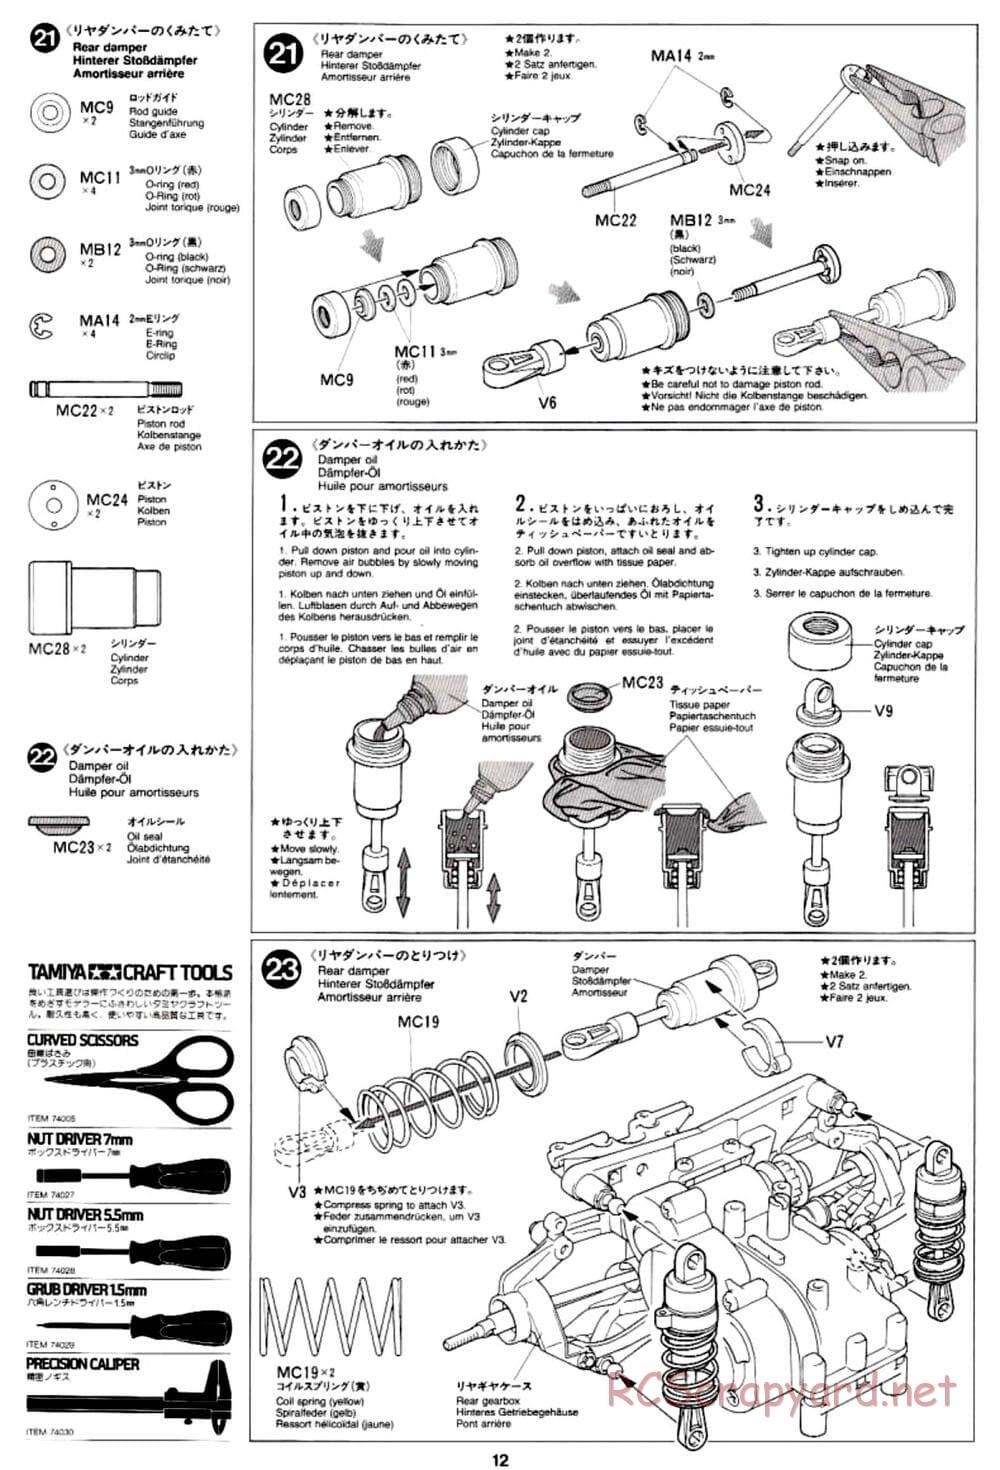 Tamiya - TA-03R TRF Special Edition Chassis - Manual - Page 12